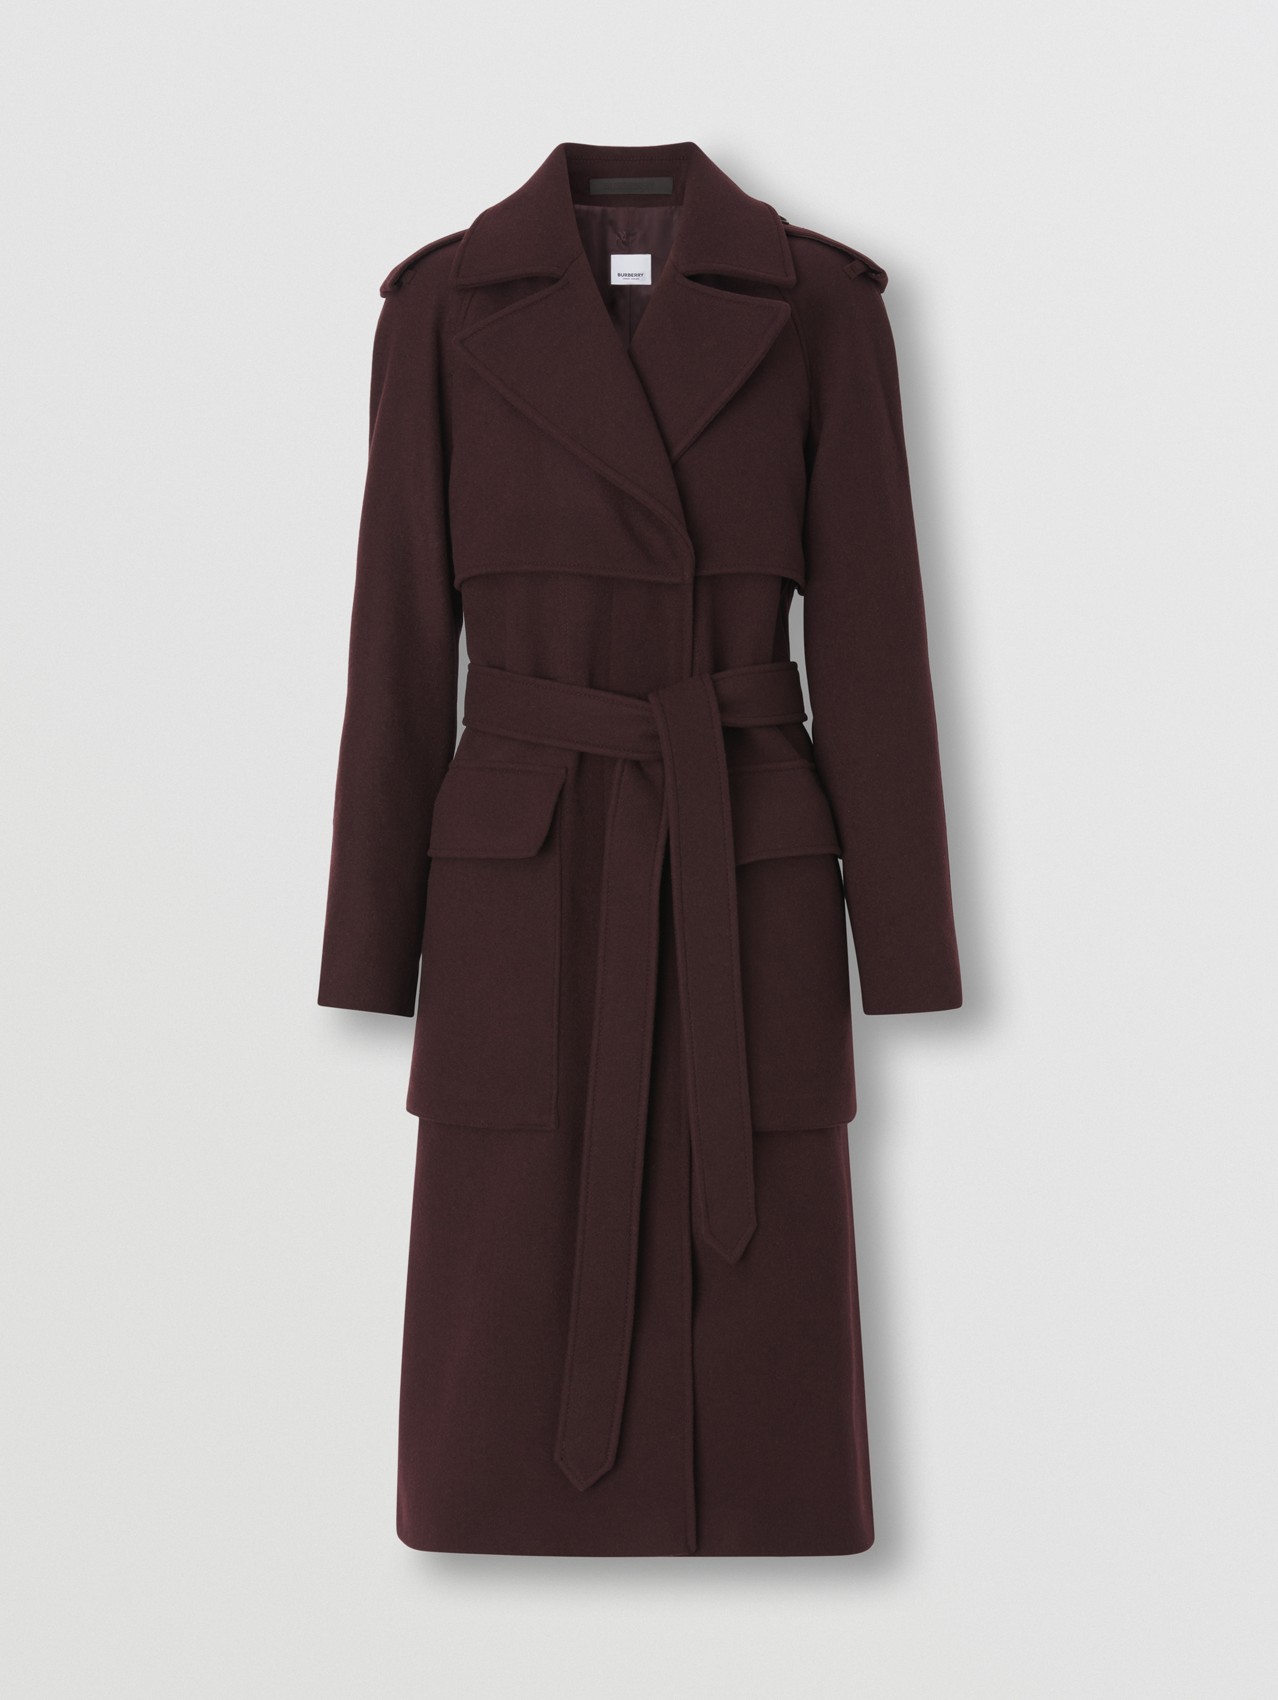 Pocket Detail Recycled Cashmere Trench Coat in Deep Maroon